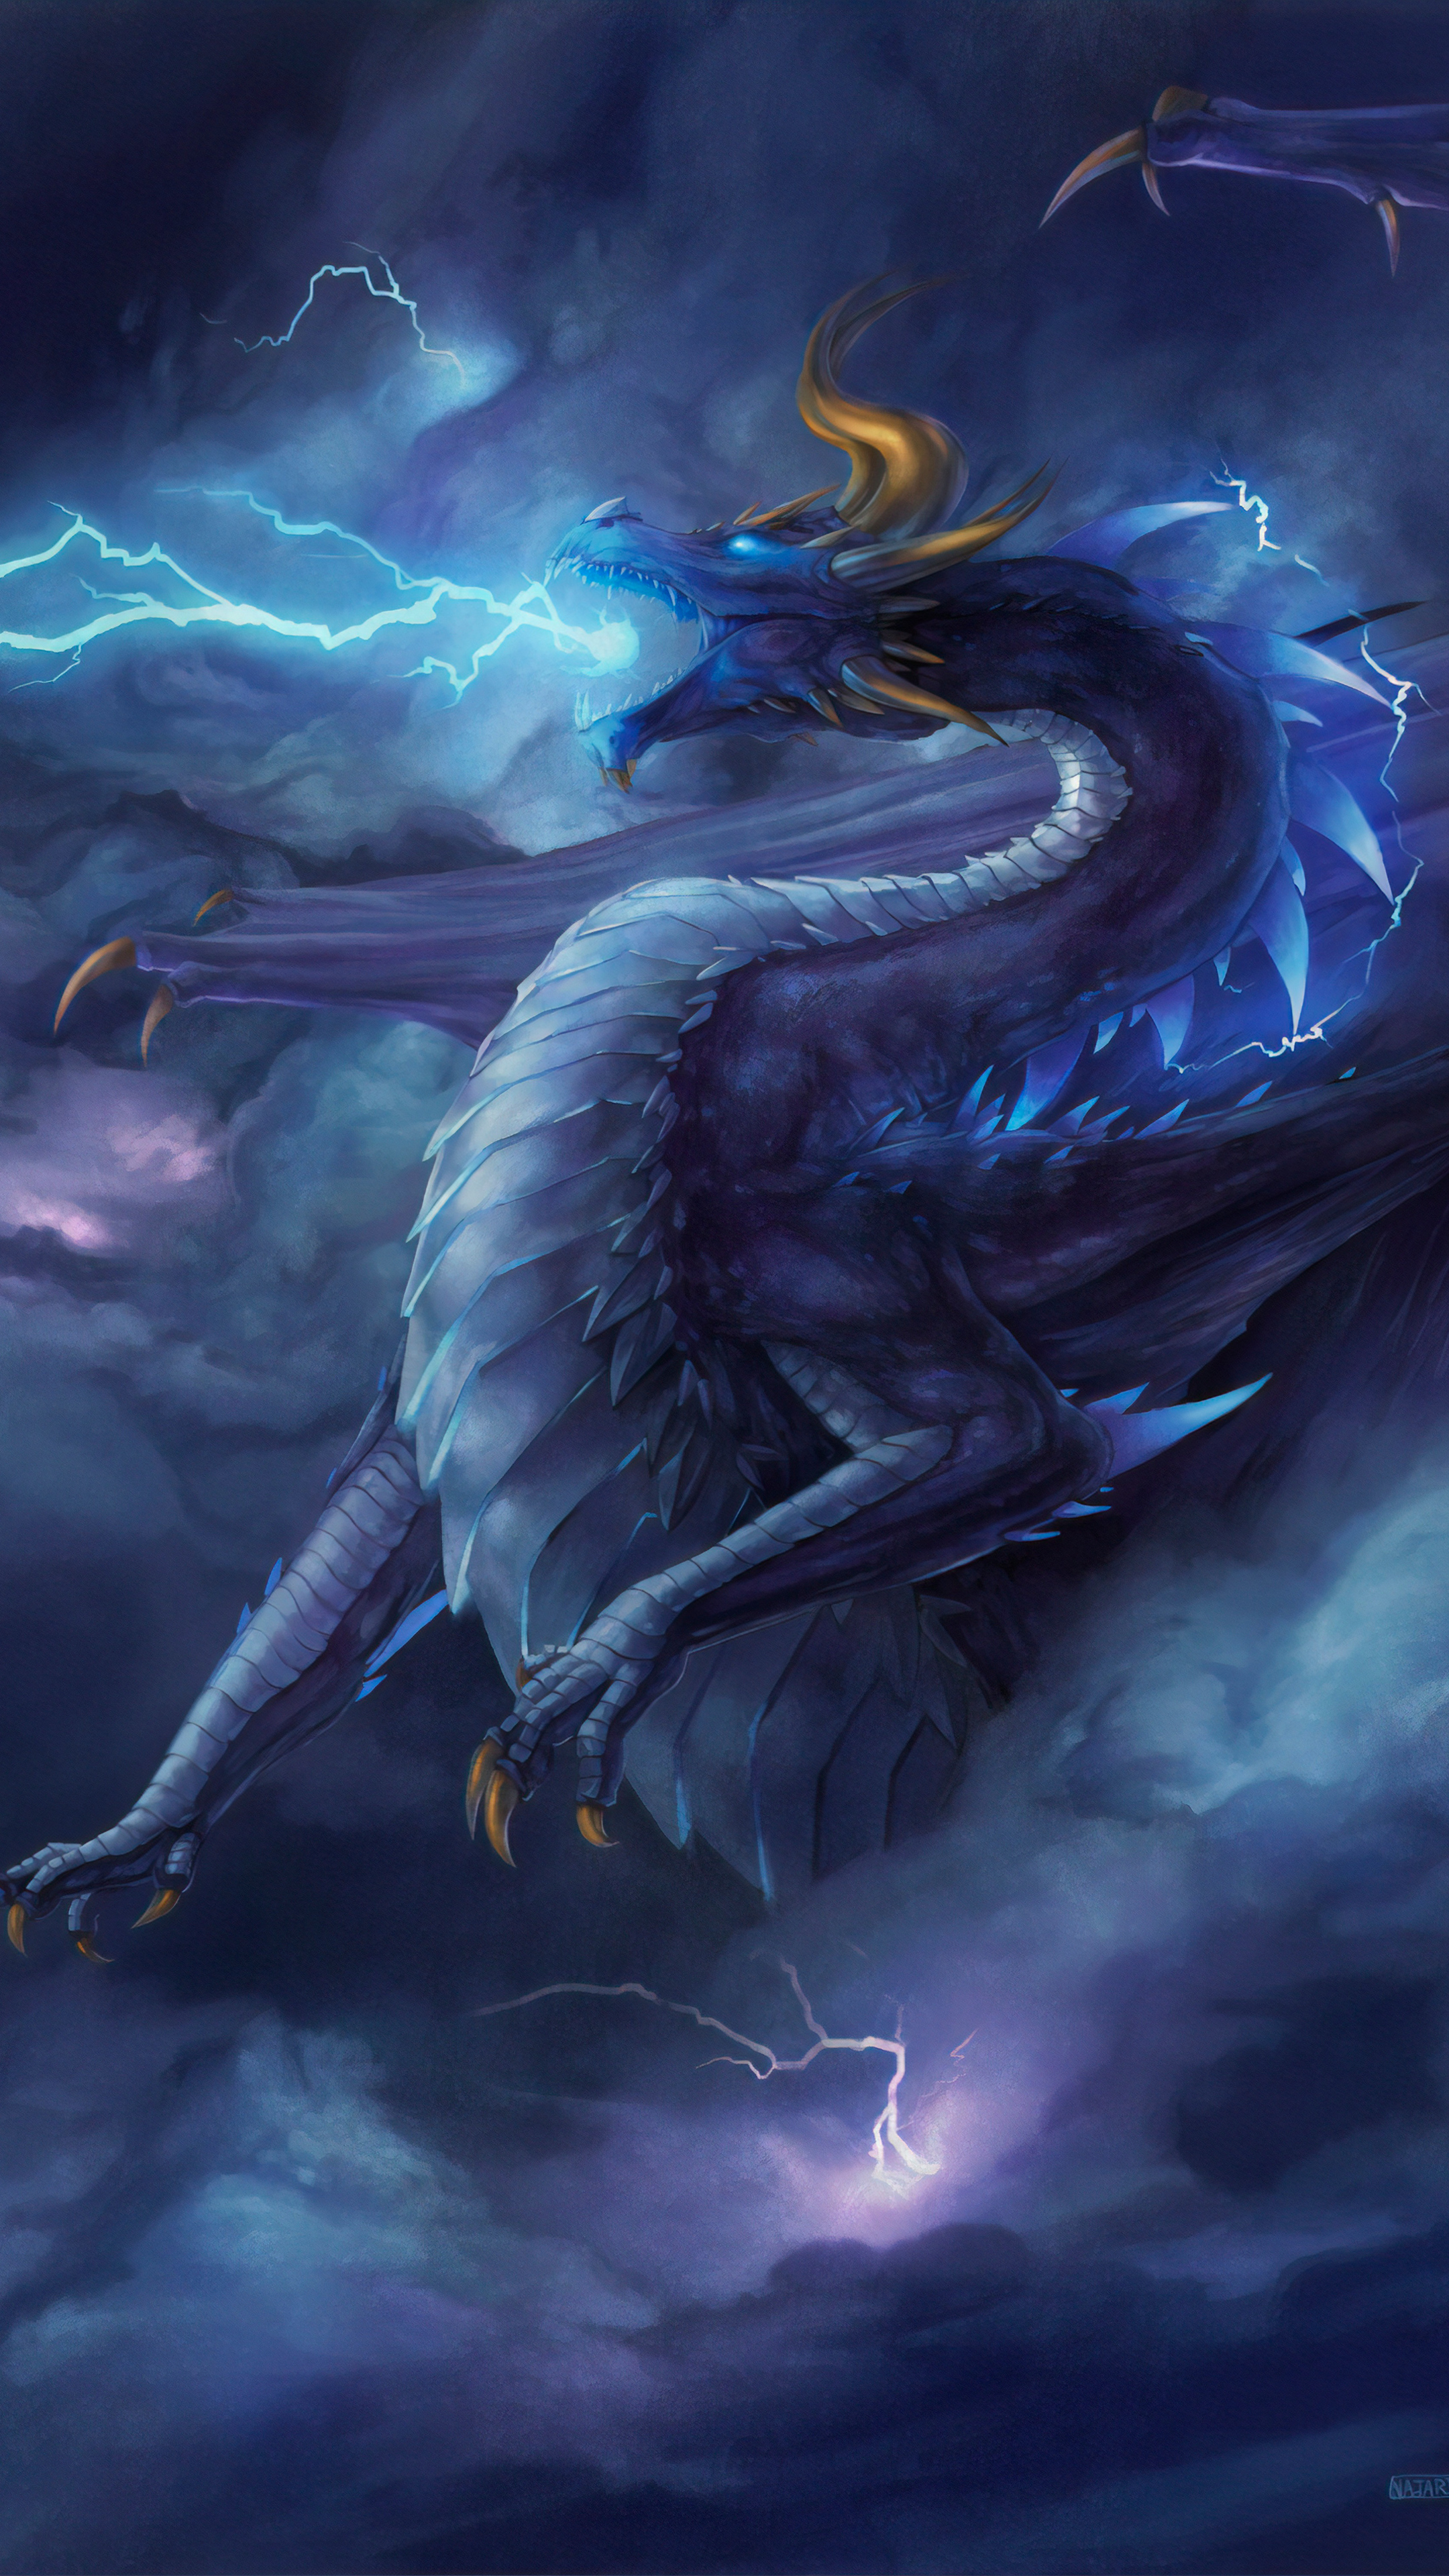 Storm Dragon Sony Xperia X, XZ, Z5 Premium HD 4k Wallpaper, Image, Background, Photo and Picture